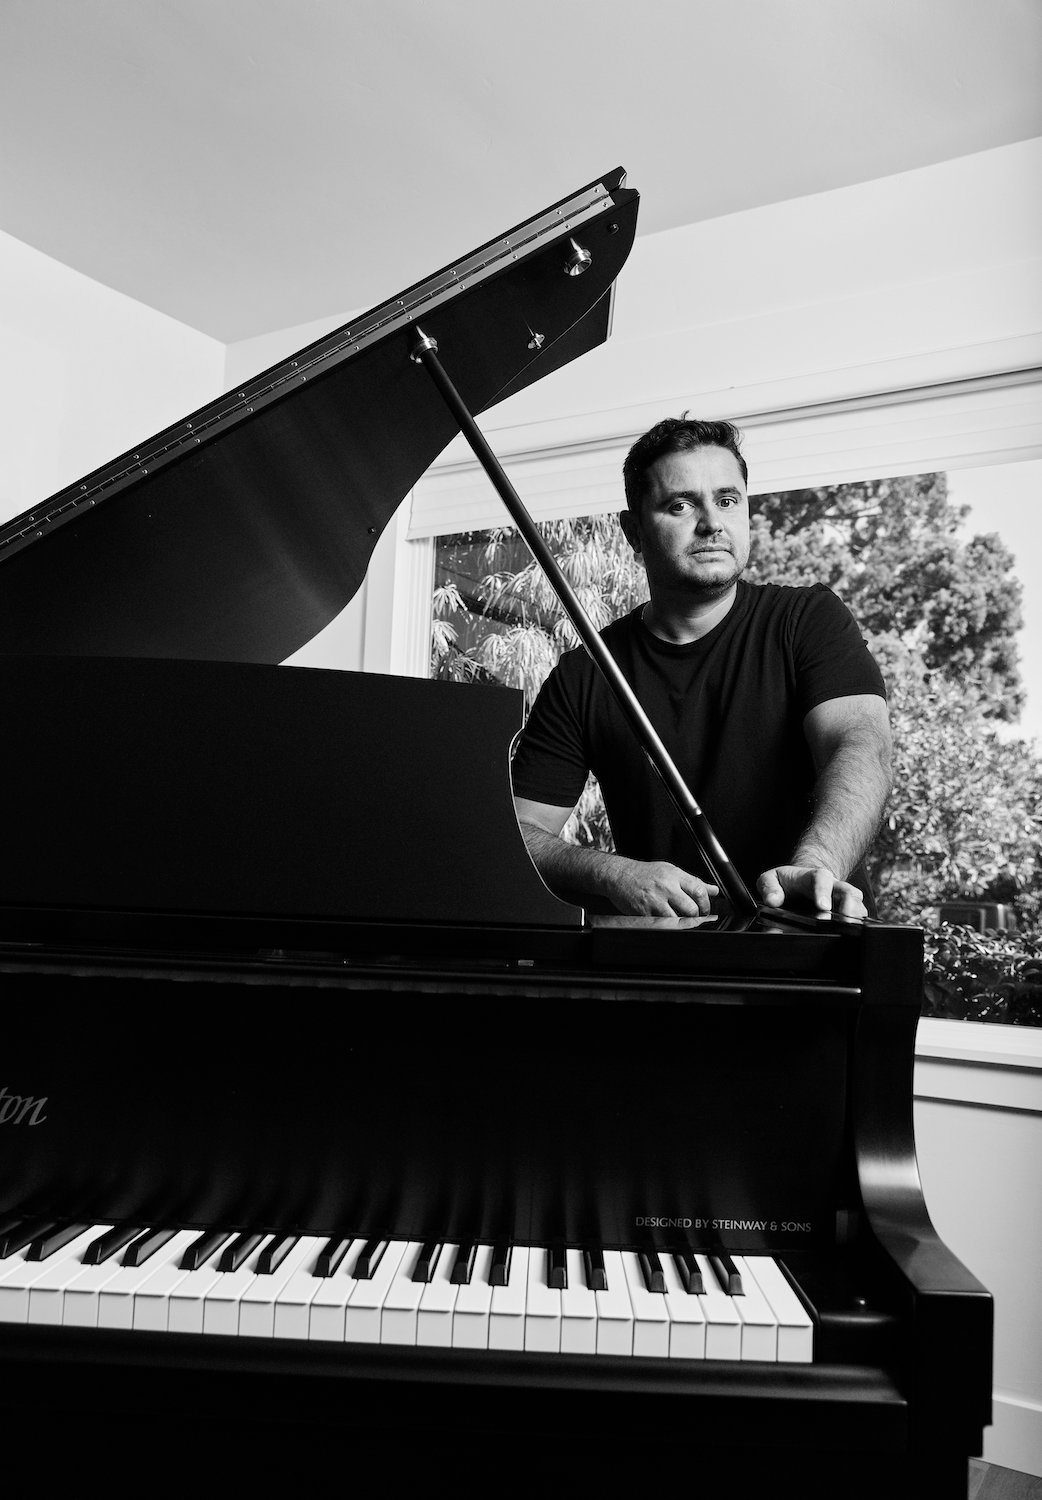 Founder of beverage company Novo Brazil Kombucha, Tiago Carneiro, standing by a piano in black and white